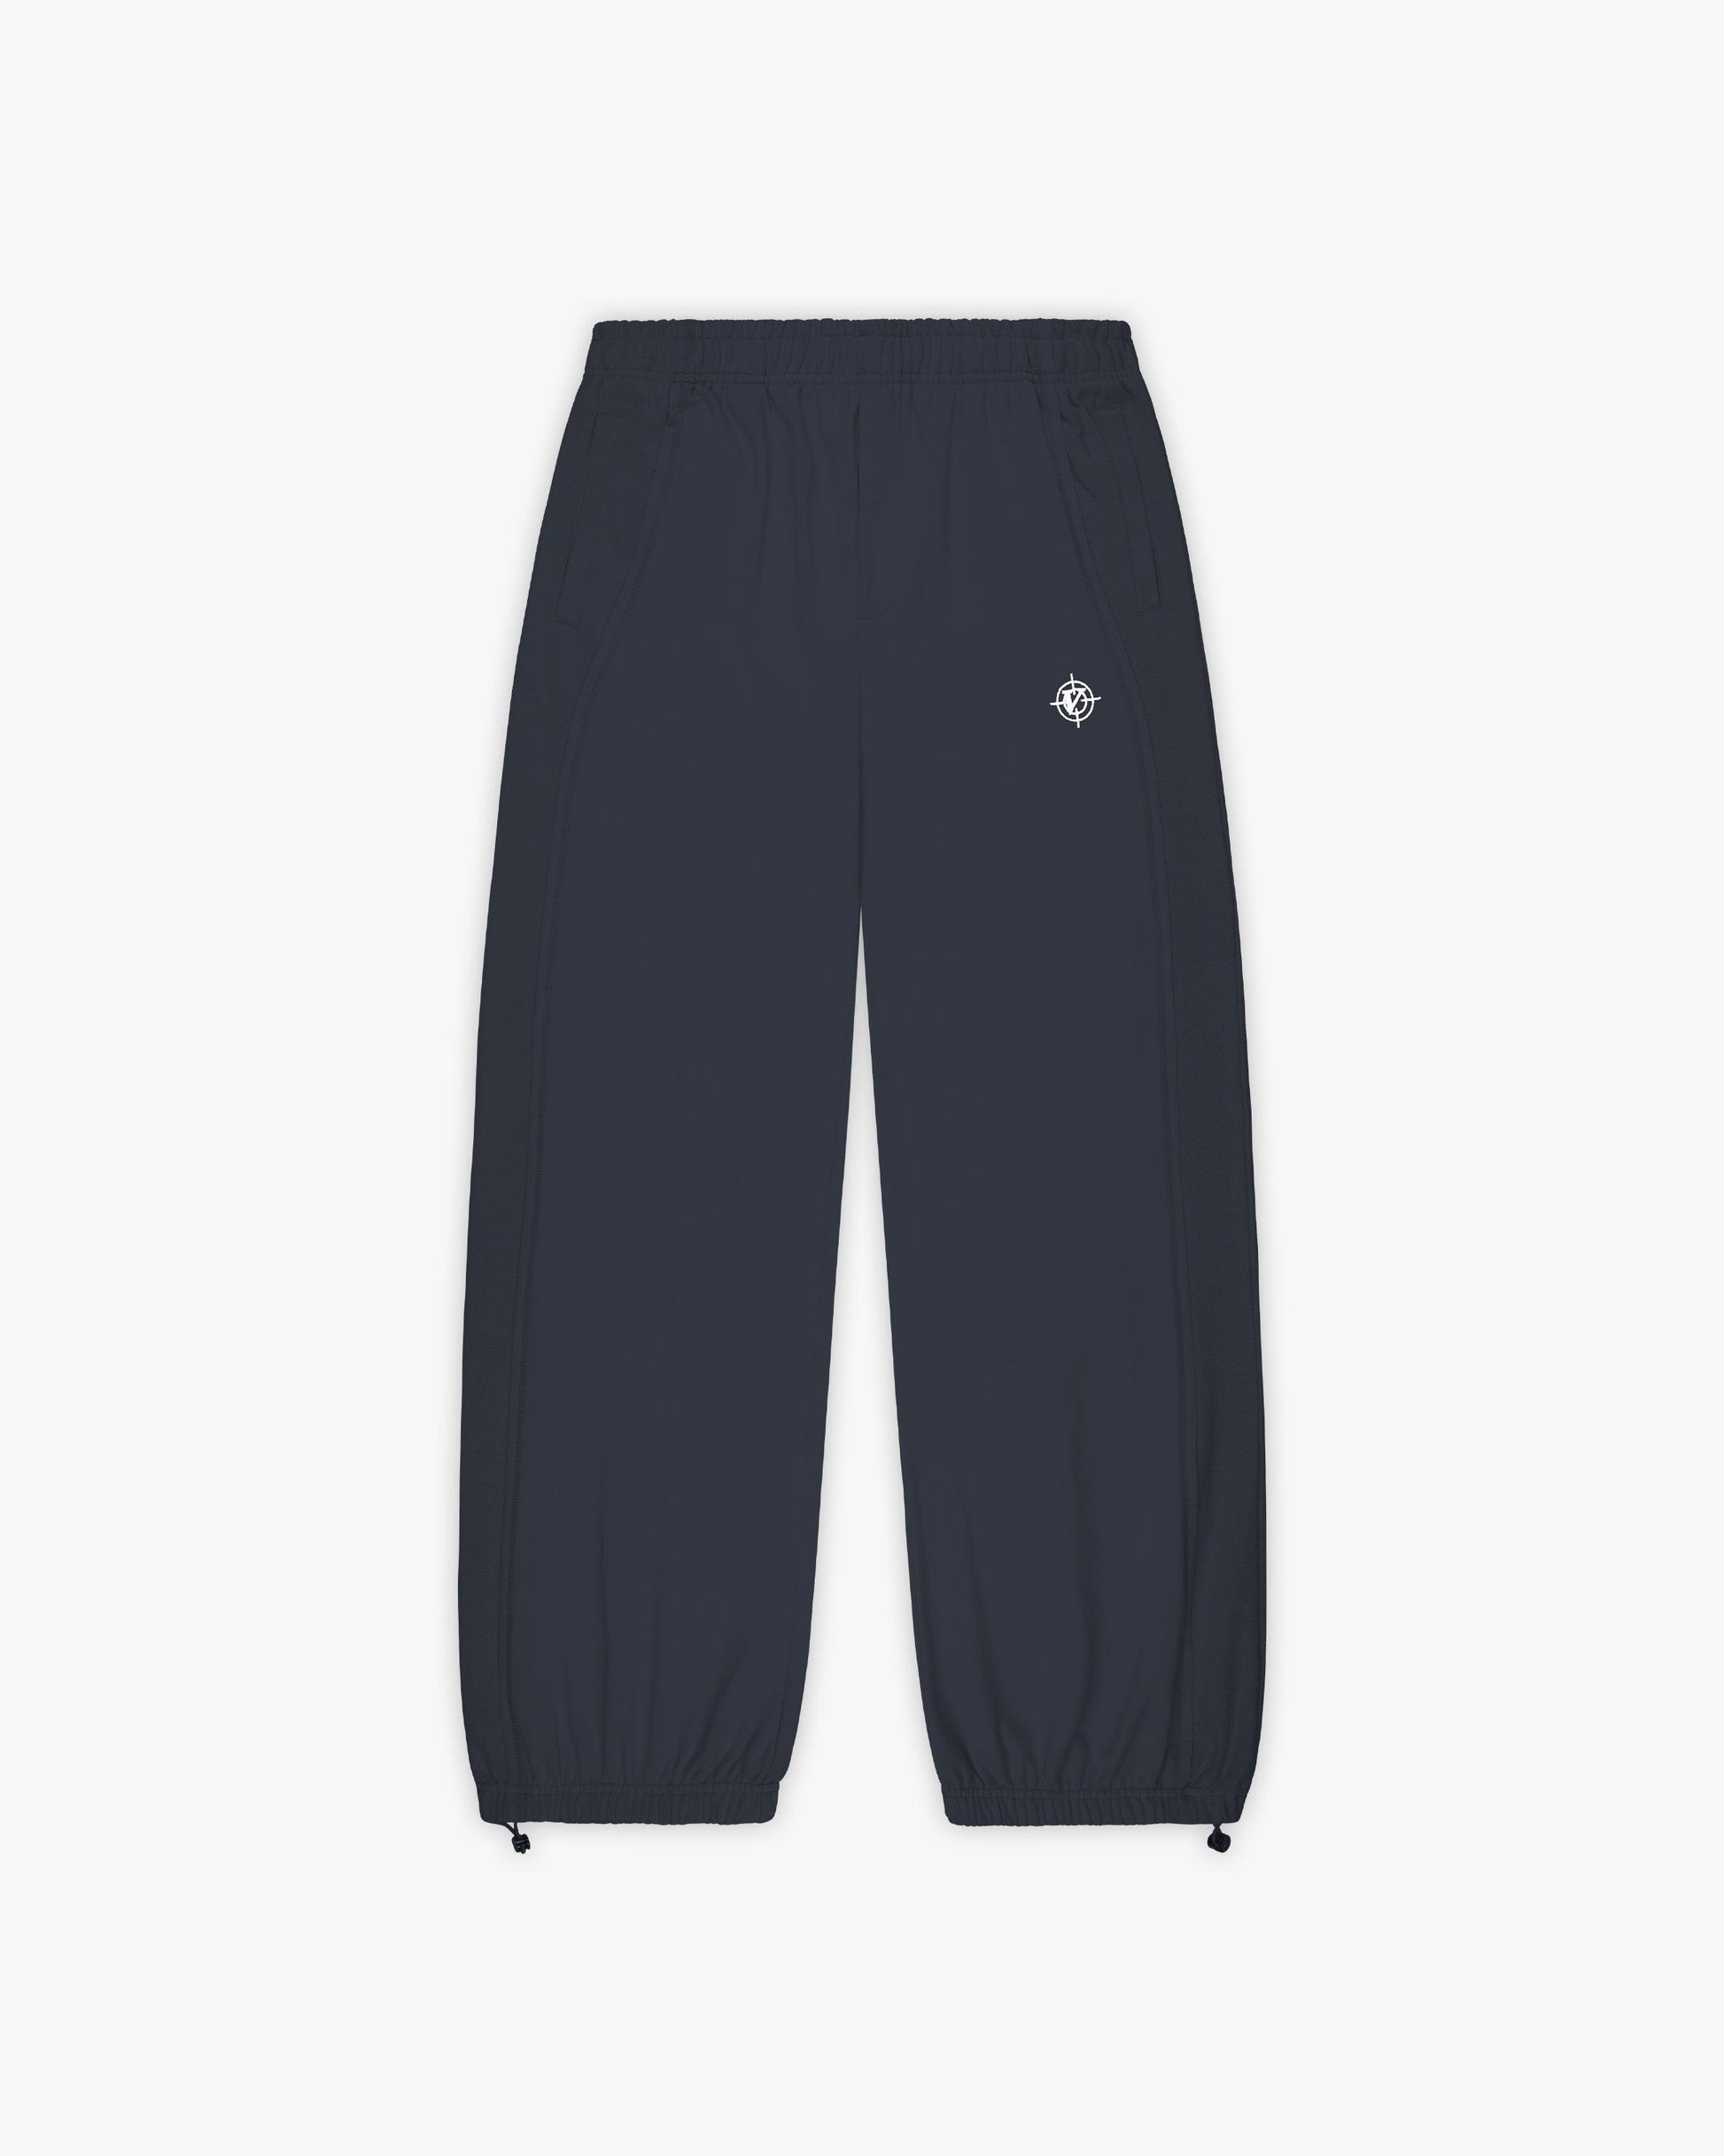 INSIDE OUT JOGGER NAVY - VICINITY